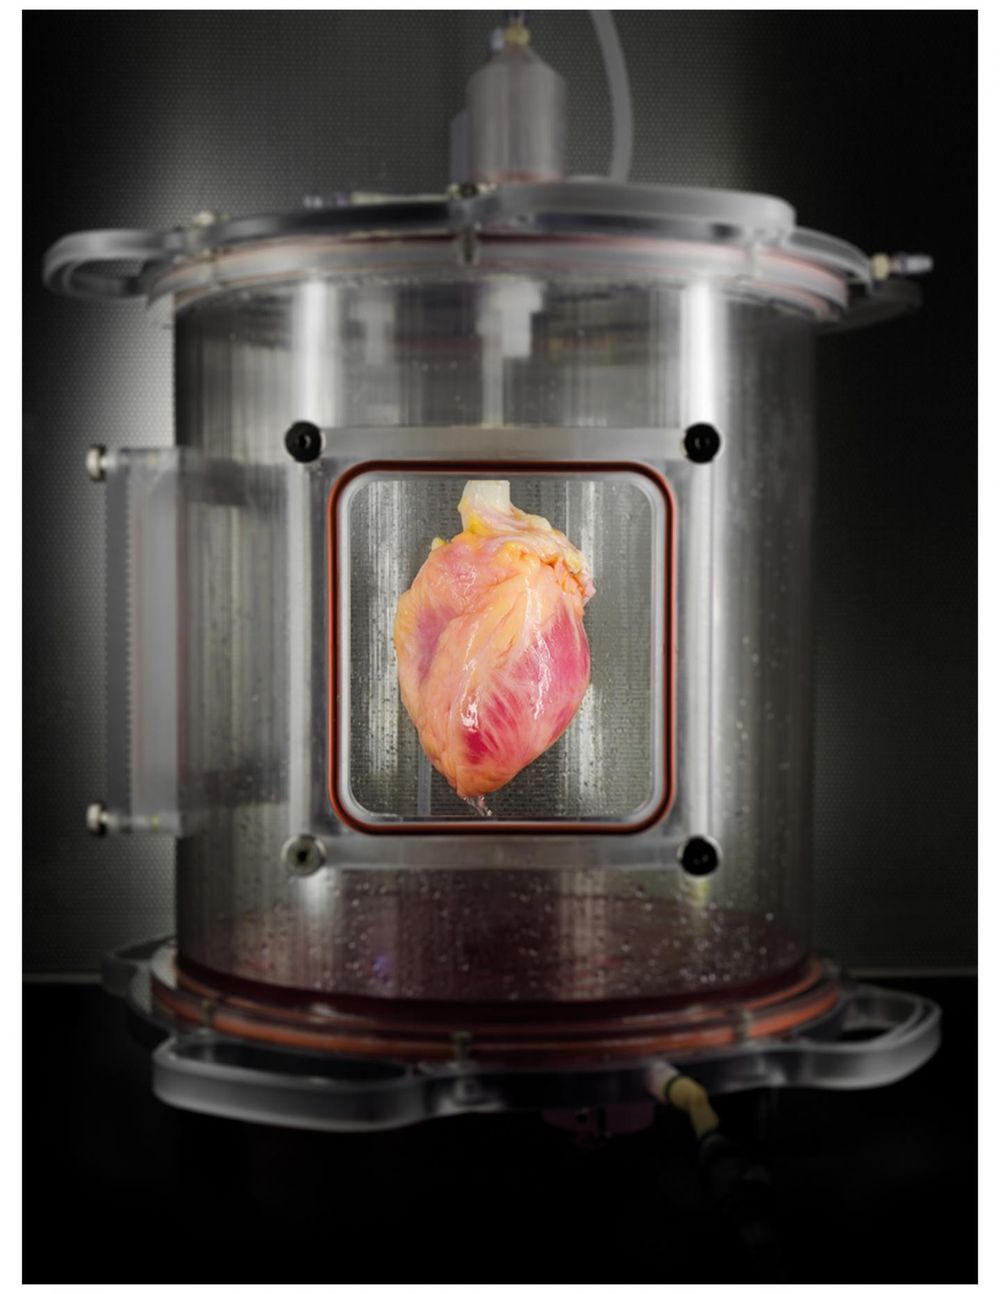 Scientists Grow Full-Sized, Beating Human Hearts From Stem Cells